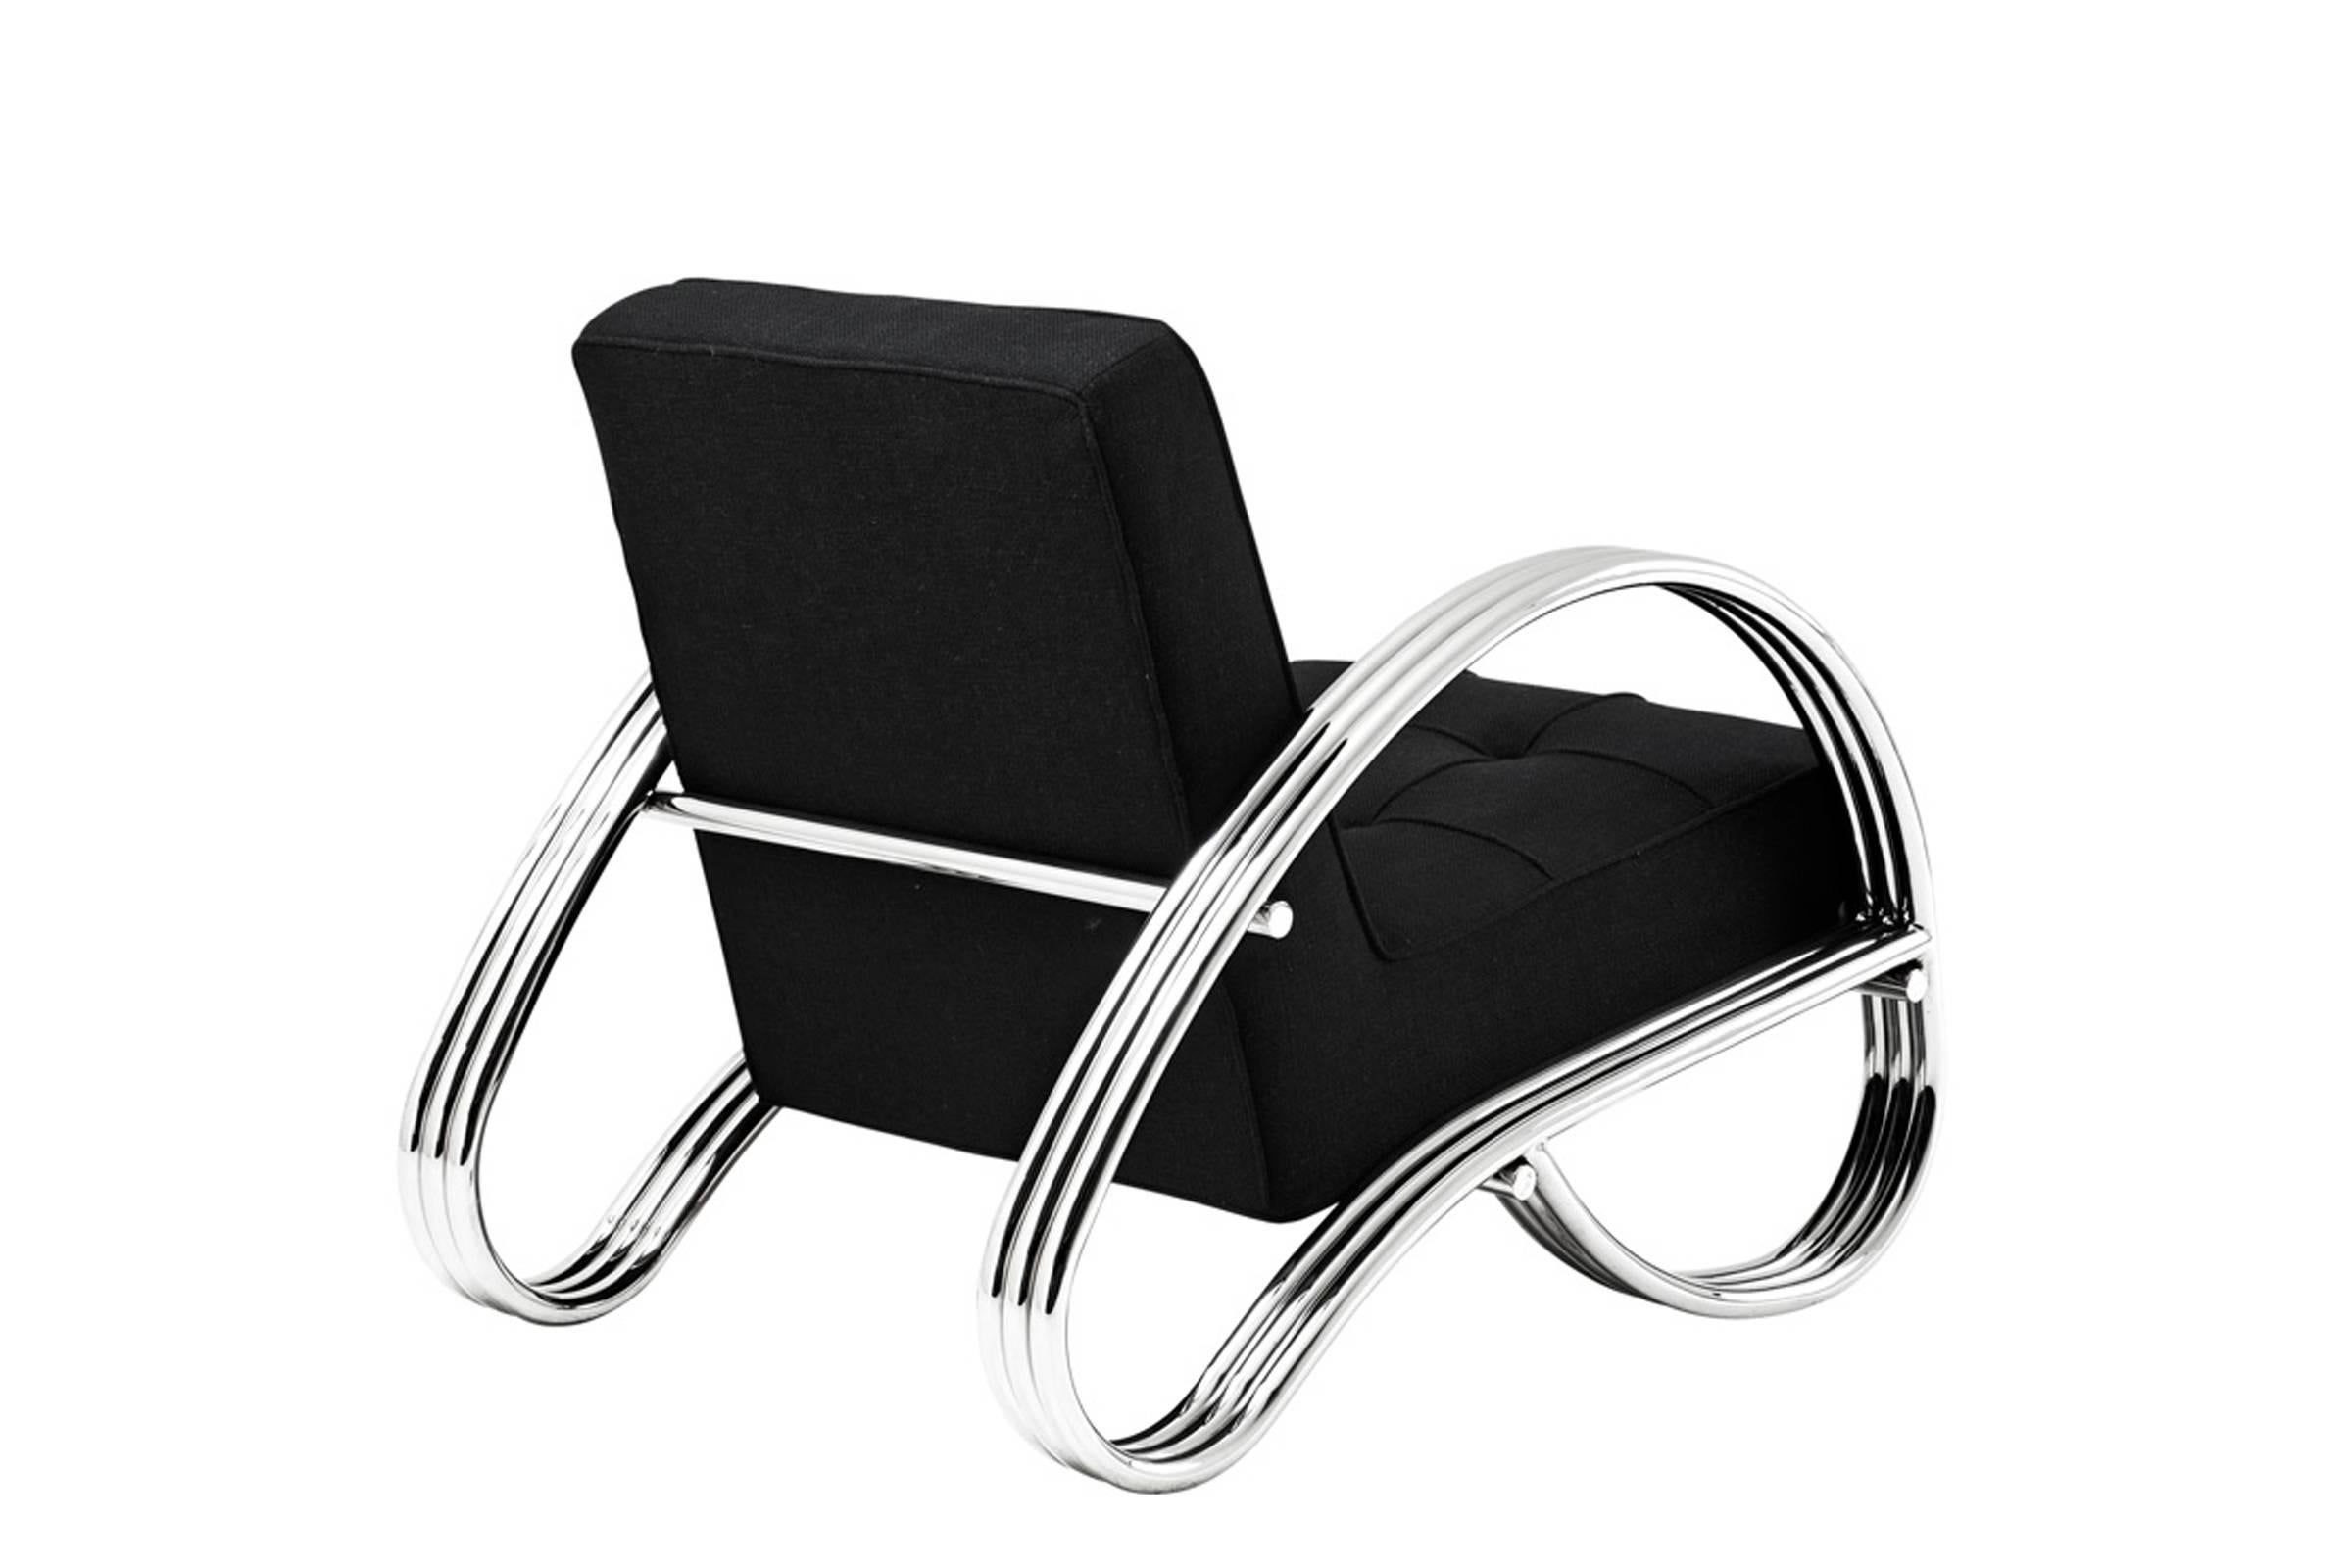 Cadillac armchair with polished stainless steel structure
and panama fabric. Made in 2018.
